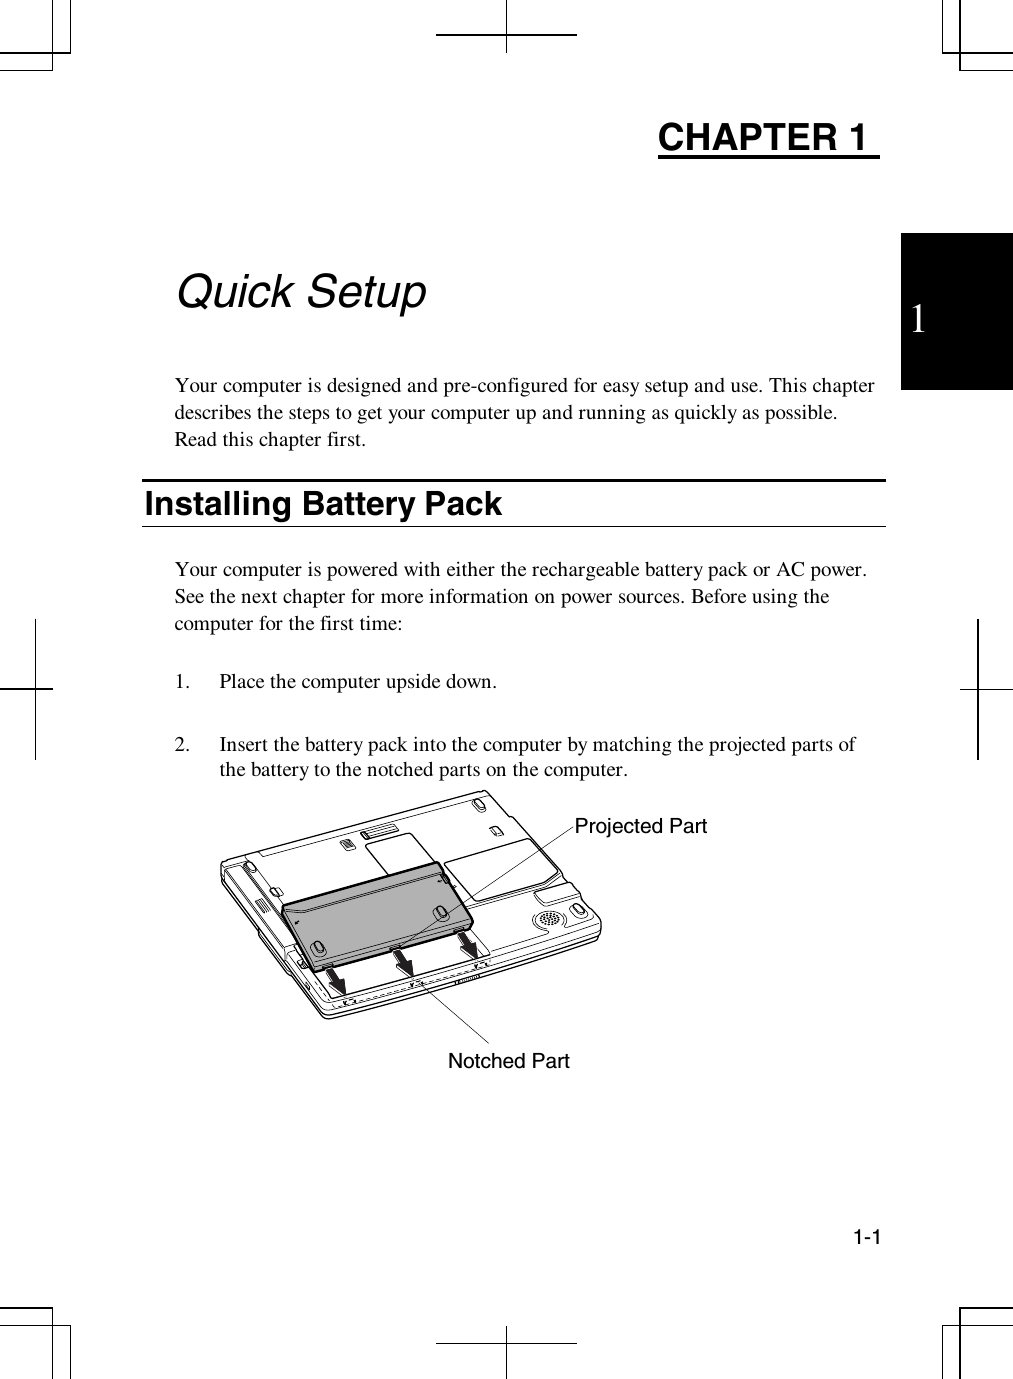 11-1CHAPTER 1Quick SetupYour computer is designed and pre-configured for easy setup and use. This chapterdescribes the steps to get your computer up and running as quickly as possible.Read this chapter first.Installing Battery PackYour computer is powered with either the rechargeable battery pack or AC power.See the next chapter for more information on power sources. Before using thecomputer for the first time:1. Place the computer upside down.2. Insert the battery pack into the computer by matching the projected parts ofthe battery to the notched parts on the computer.Notched PartProjected Part